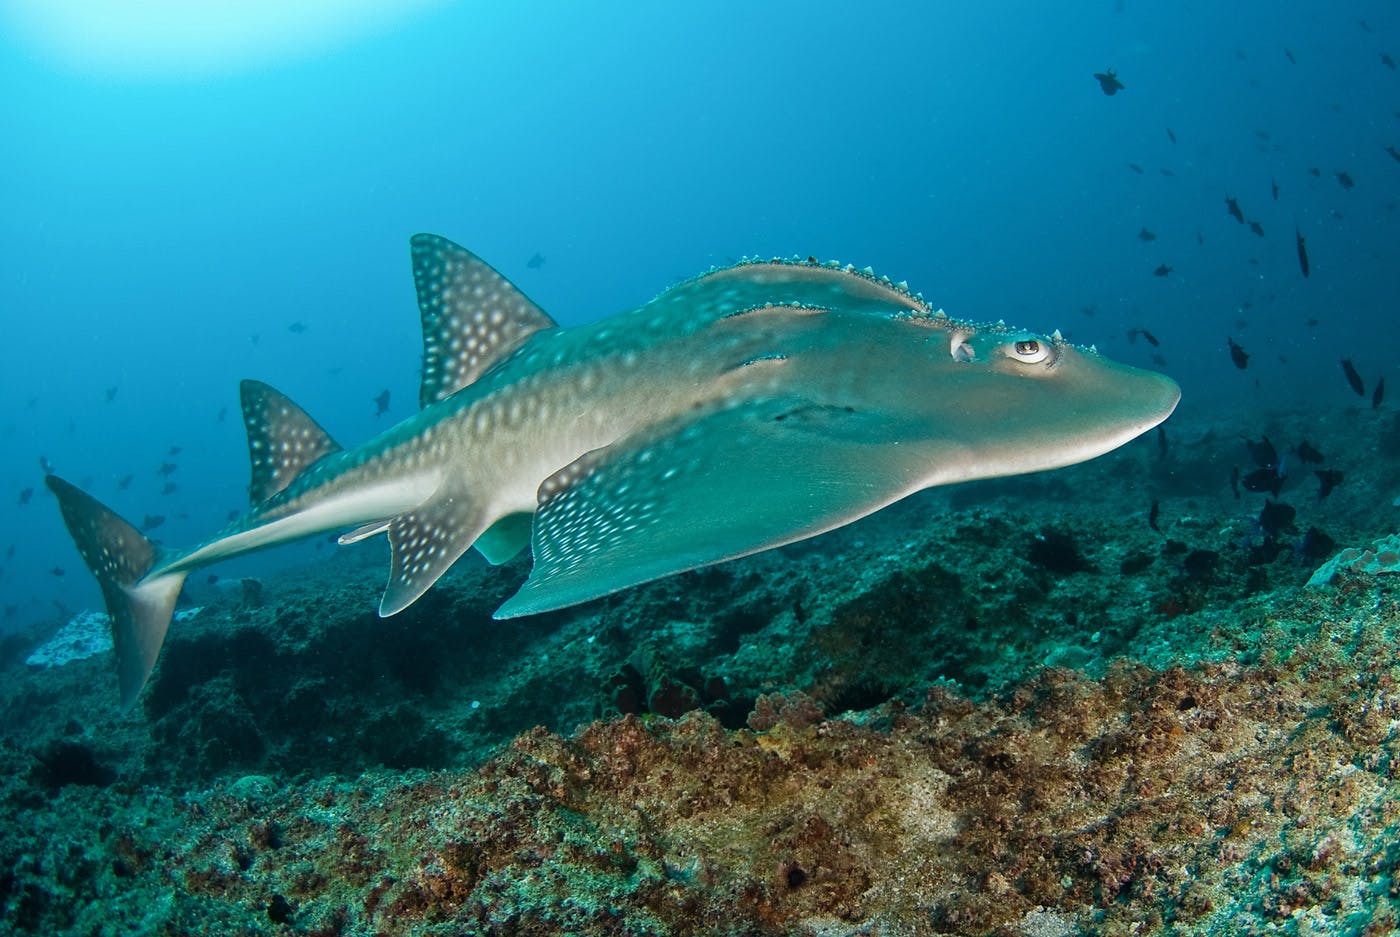 Record-breaking protection listings have been adopted for sharks and rays. Now it’s time to implement